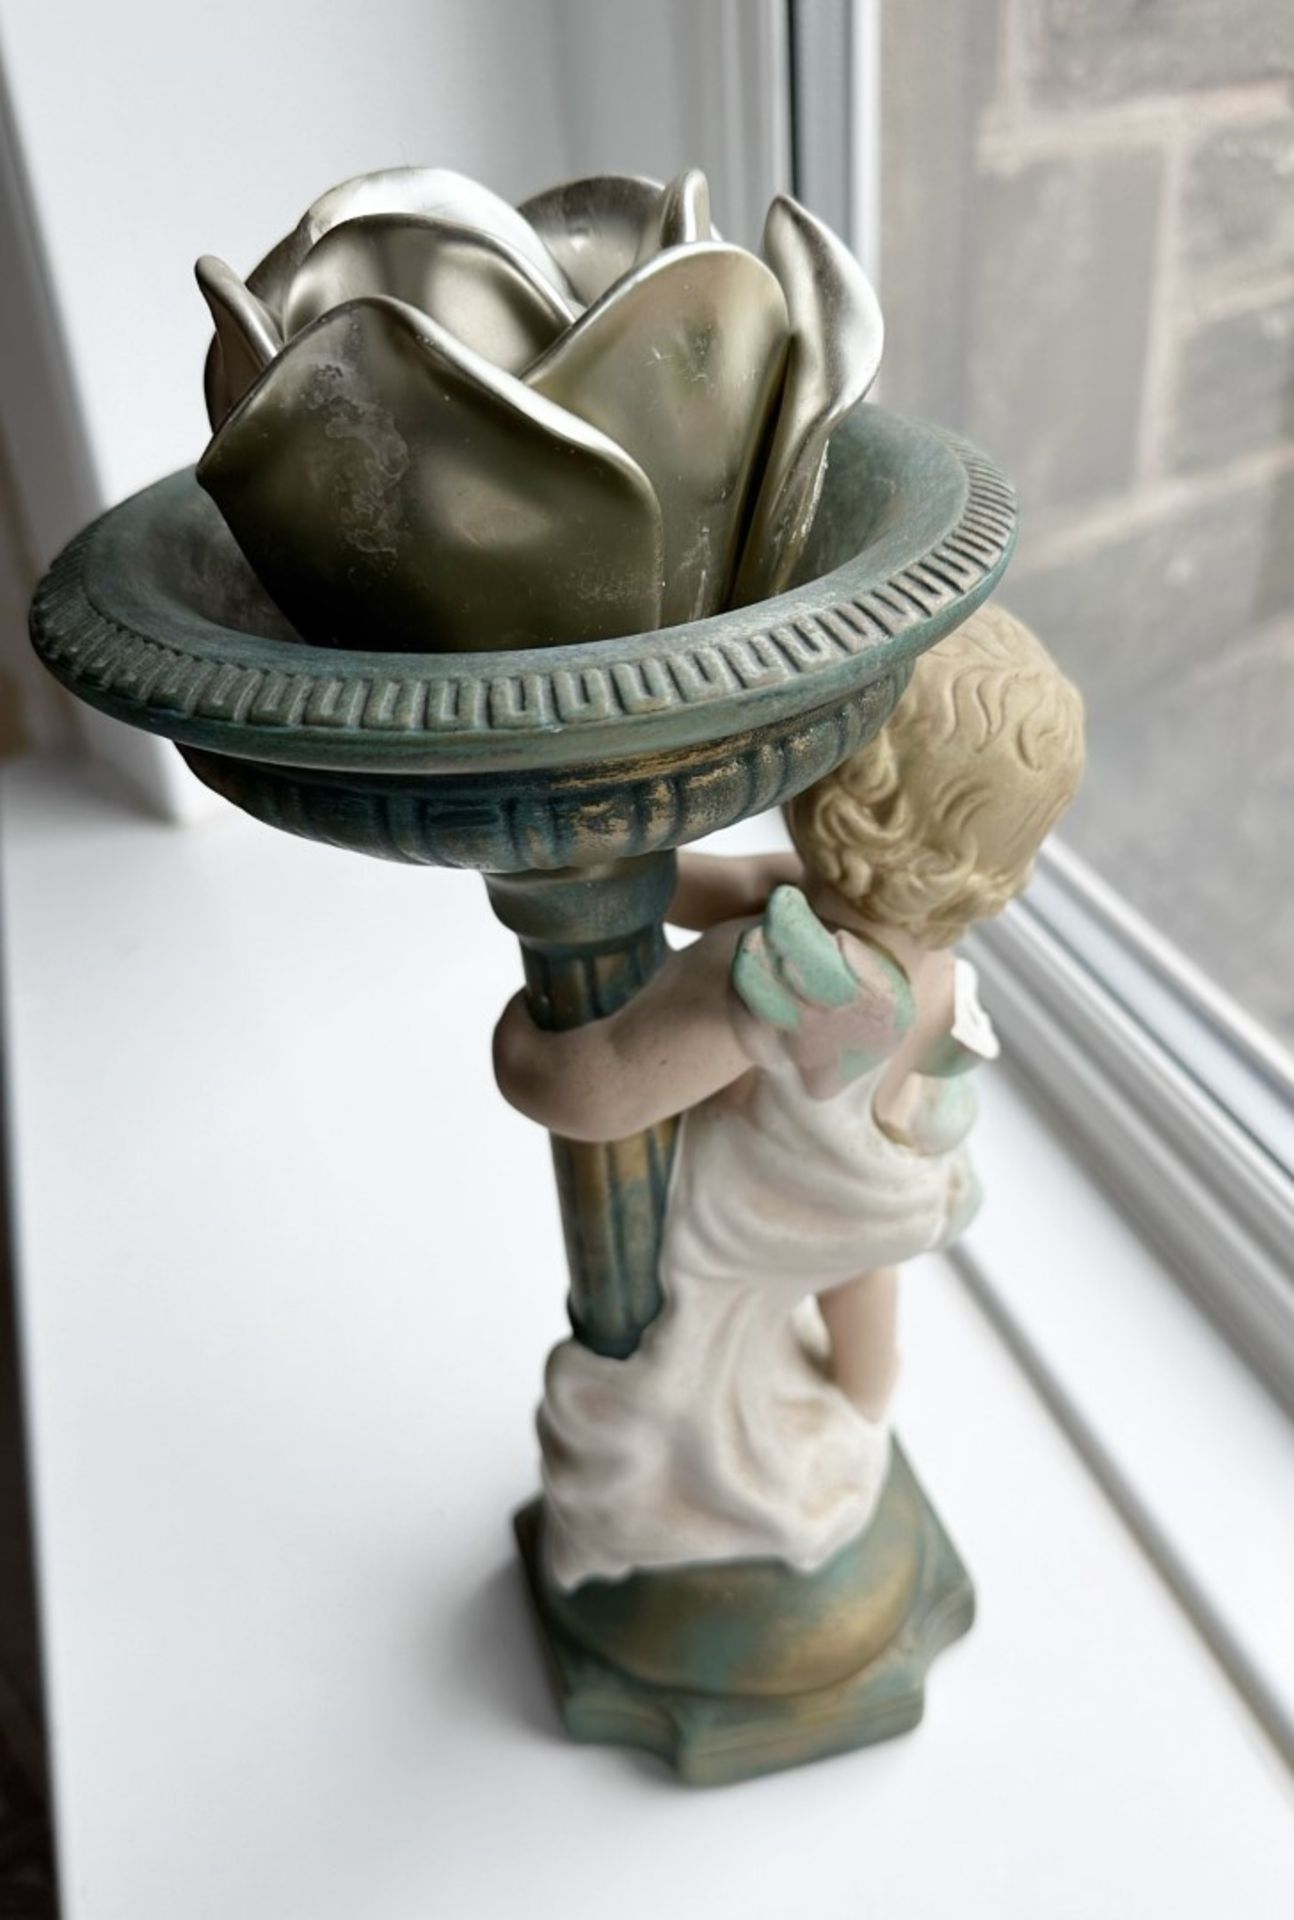 2 x Vintage French Porcelain Cherub Candle Holders - Image 3 of 9